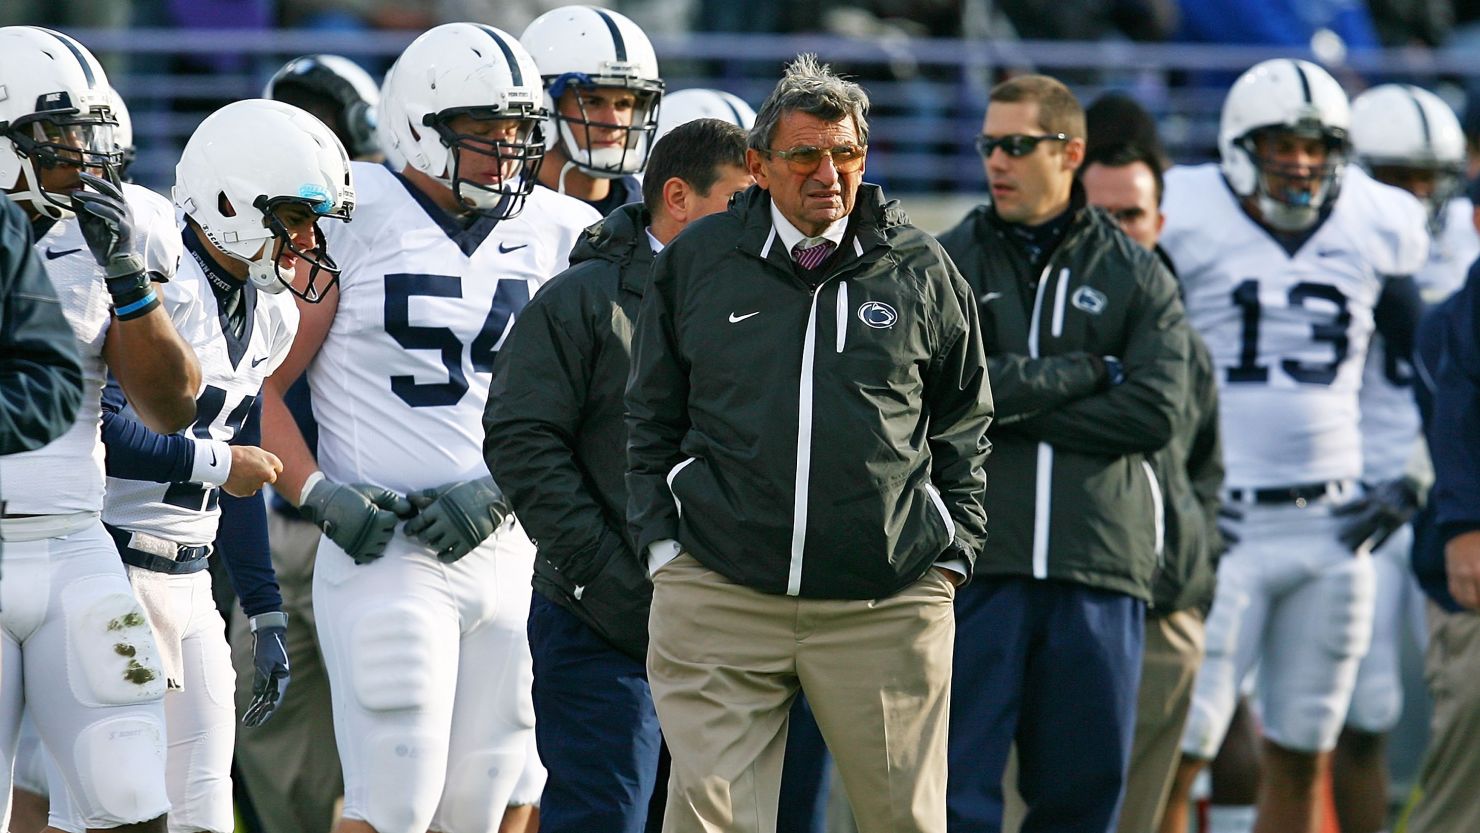 Penn State coach Joe Paterno, shown during a game in October 2011.